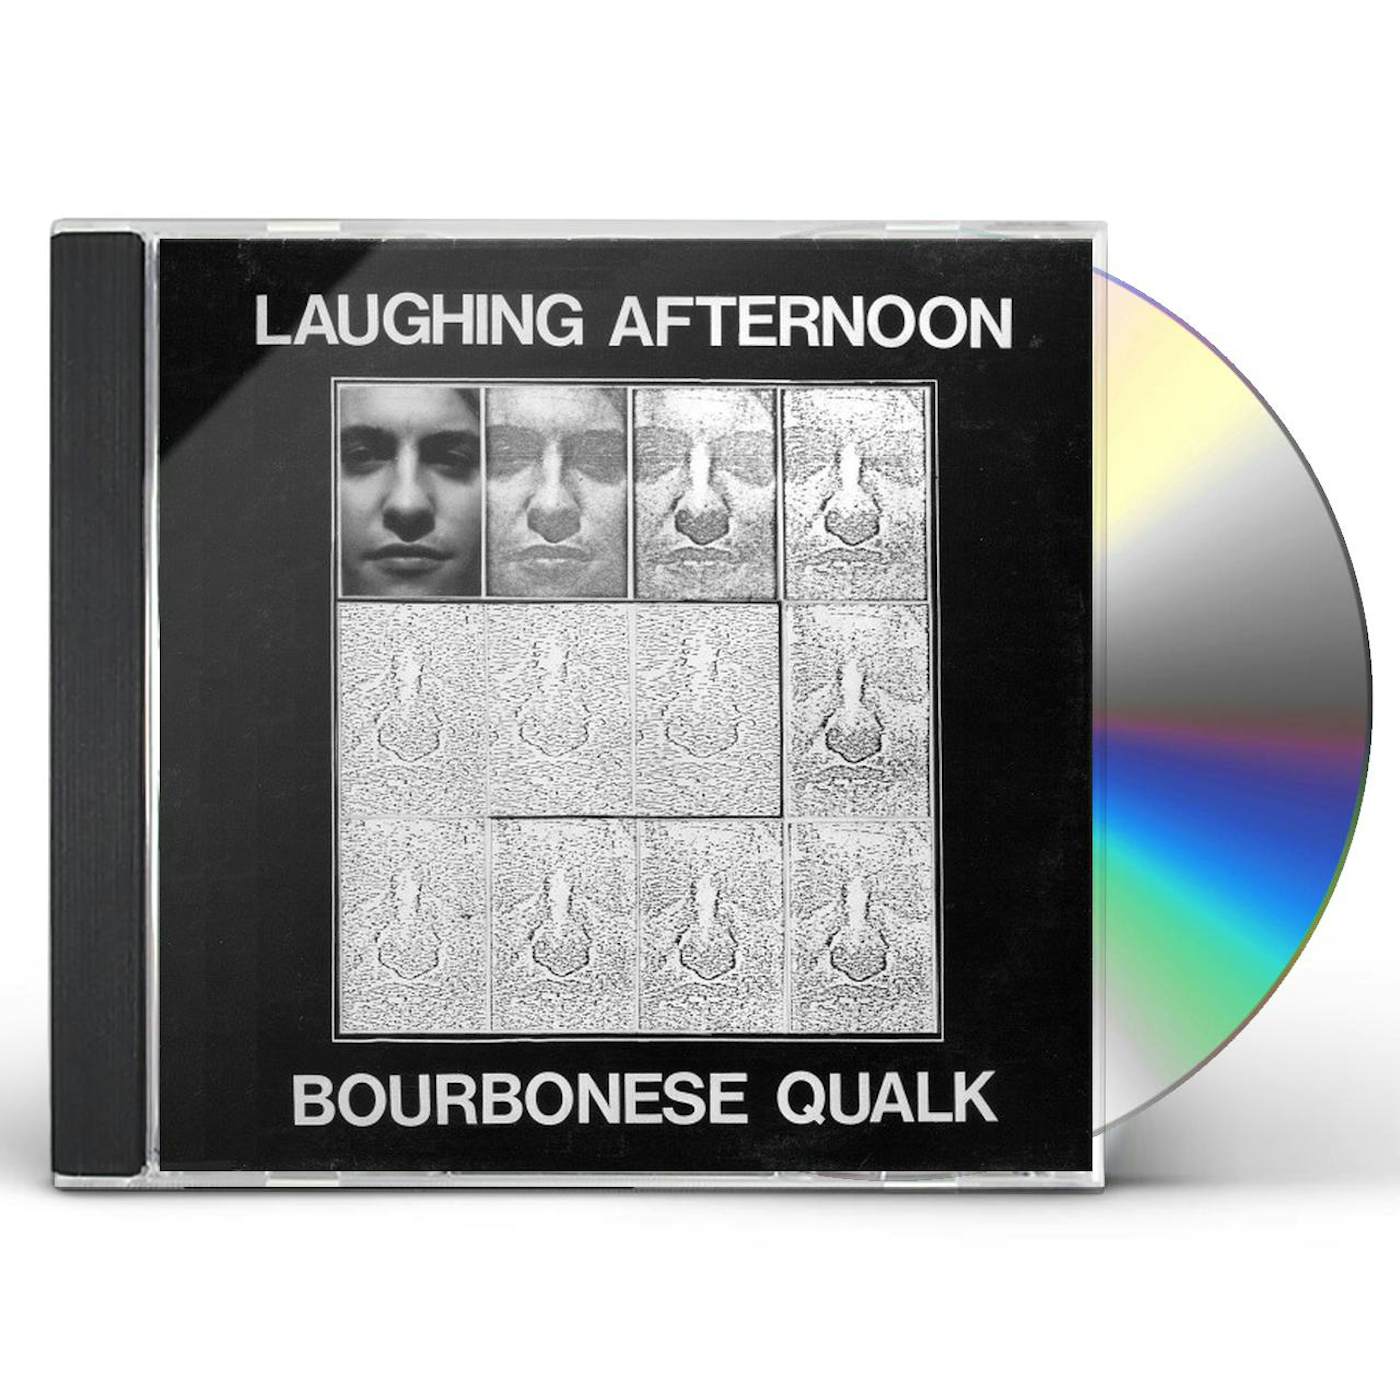 Bourbonese Qualk LAUGHING AFTERNOON CD